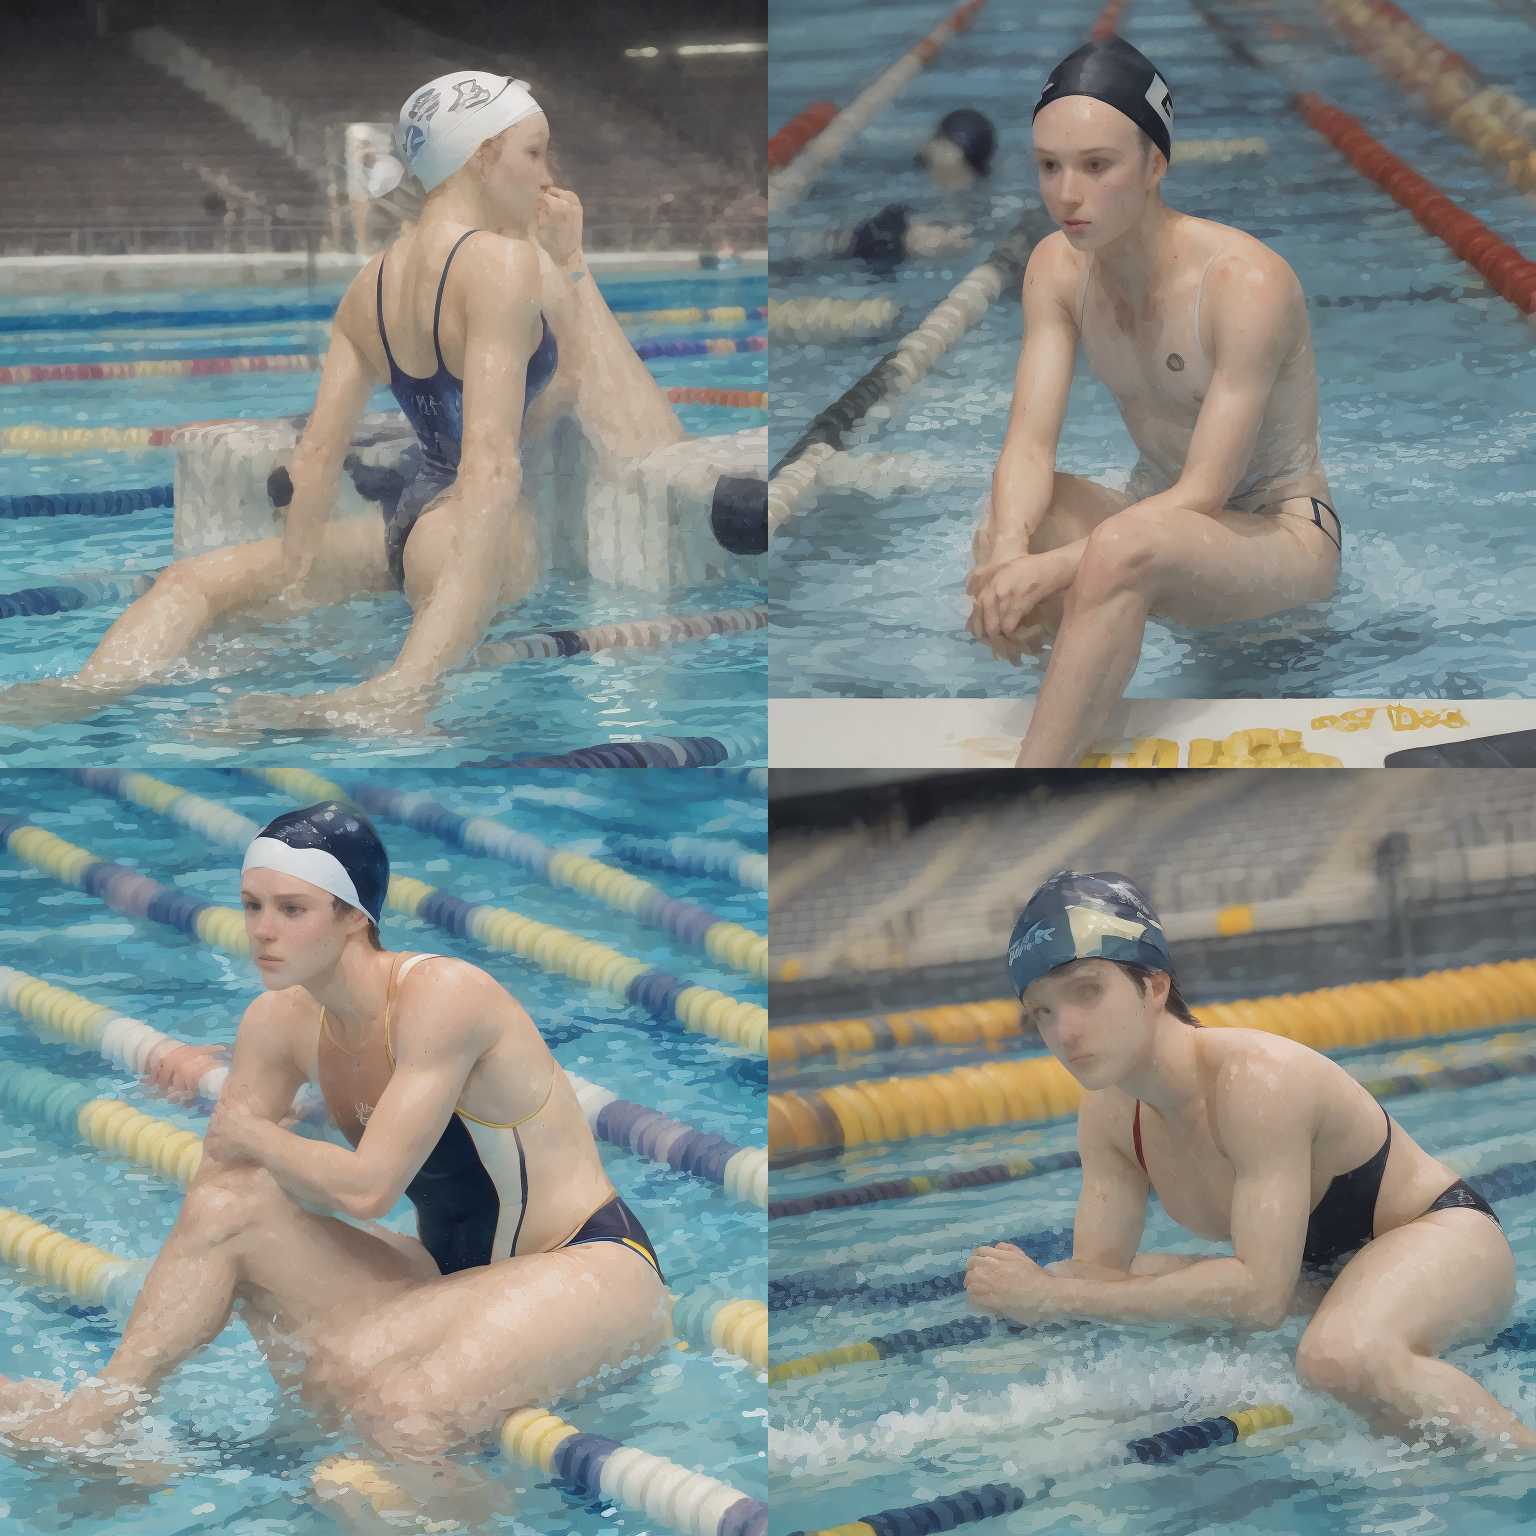 A swimmer waiting for the start signal during a competition